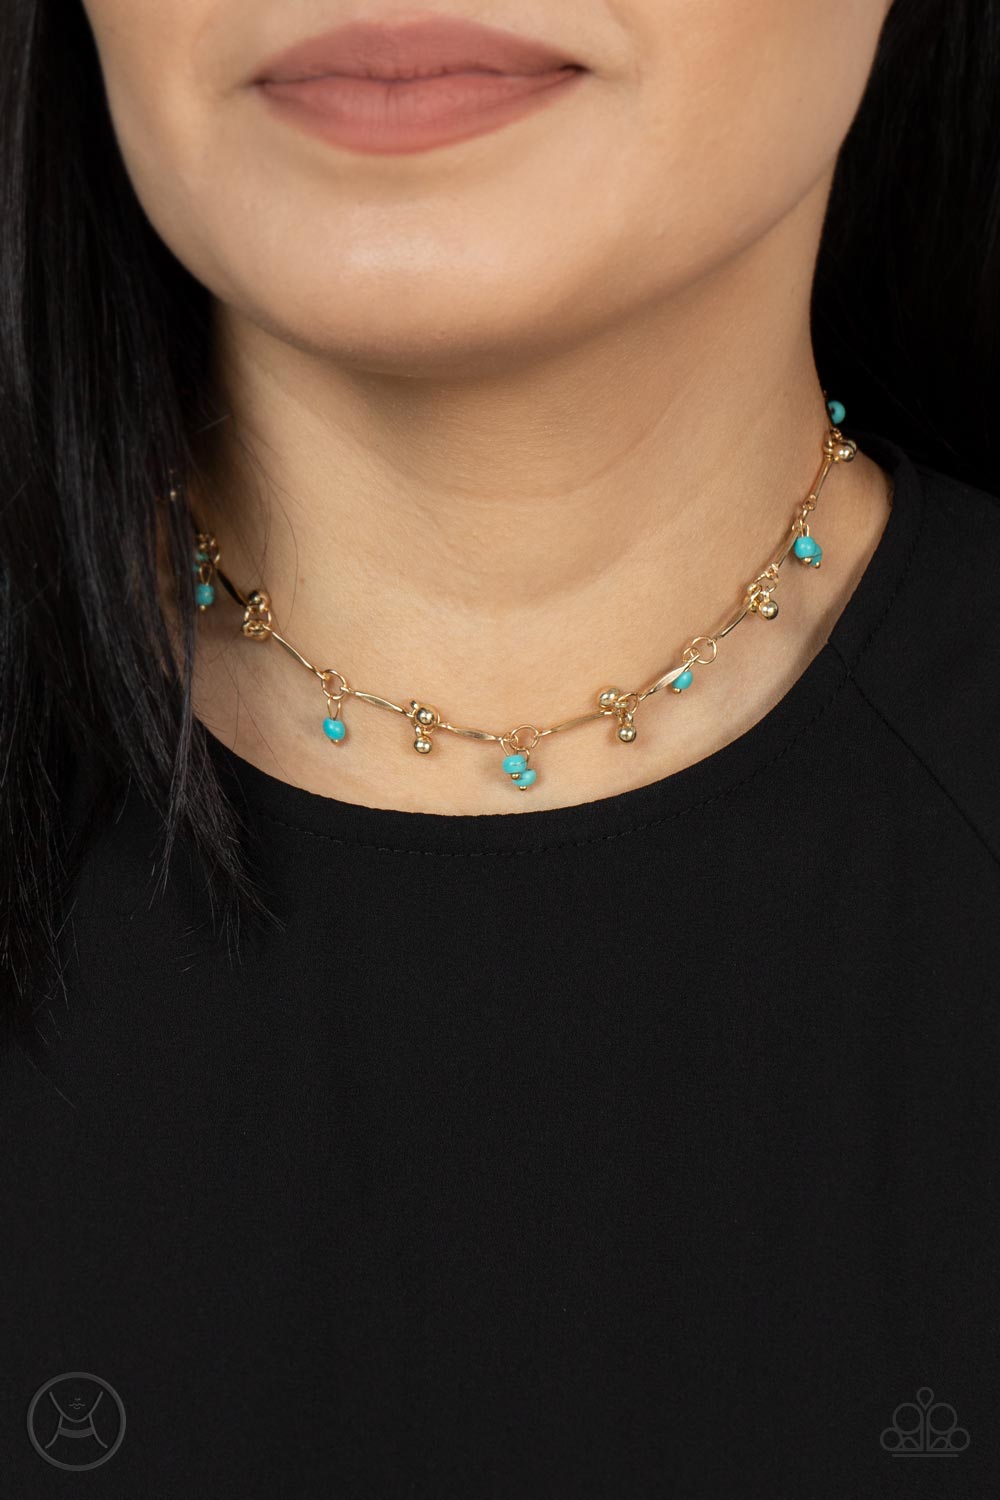 Sahara Social Gold and Turquoise Choker Necklace - Paparazzi Accessories-on model - CarasShop.com - $5 Jewelry by Cara Jewels